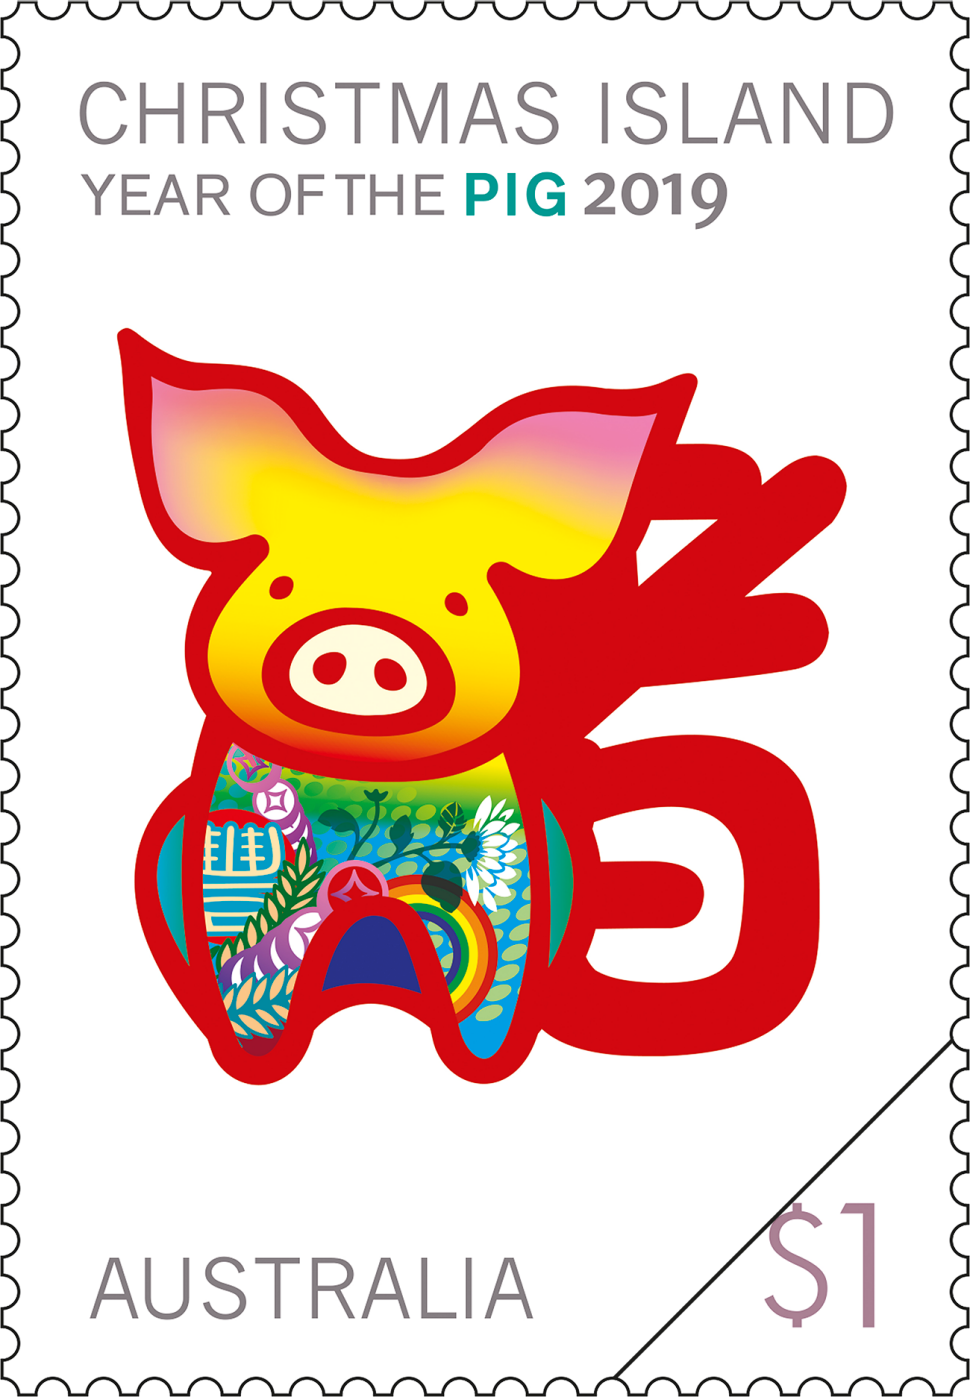 Christmas Island Year of the Pig 2019